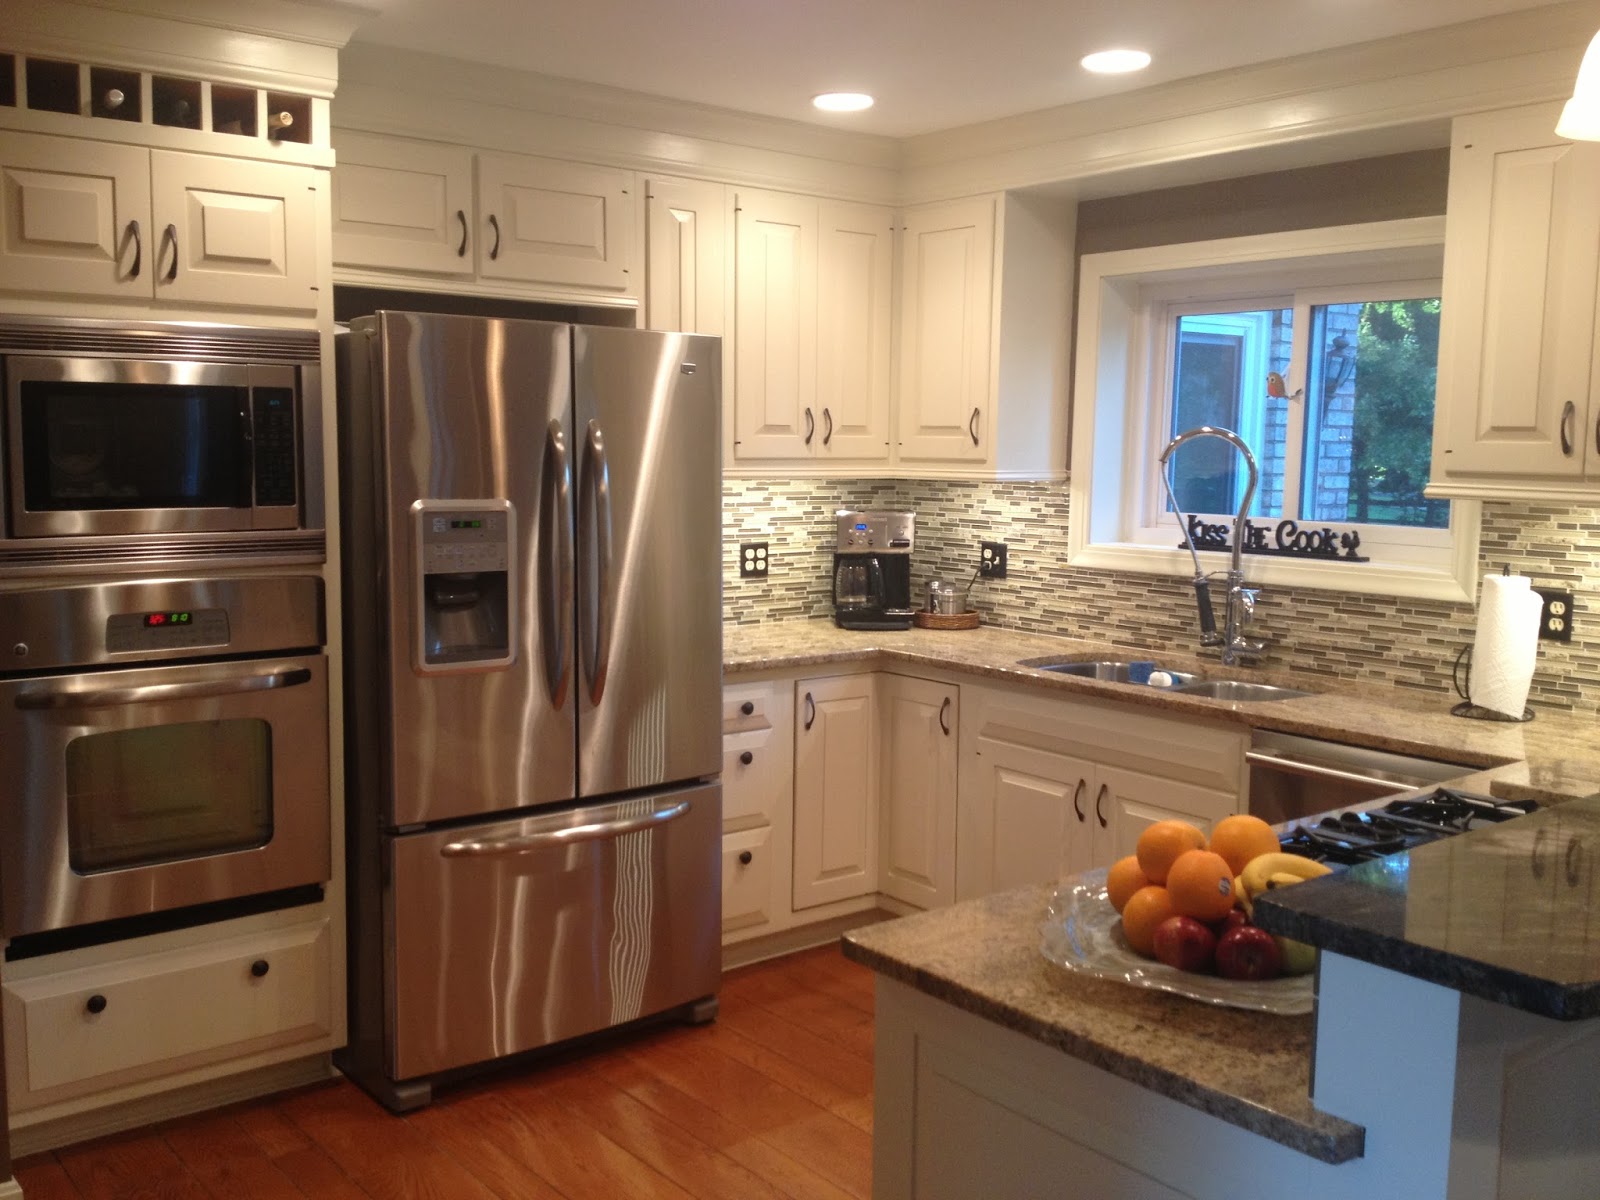 Four Seasons Style The NEW kitchen remodel on a budget 